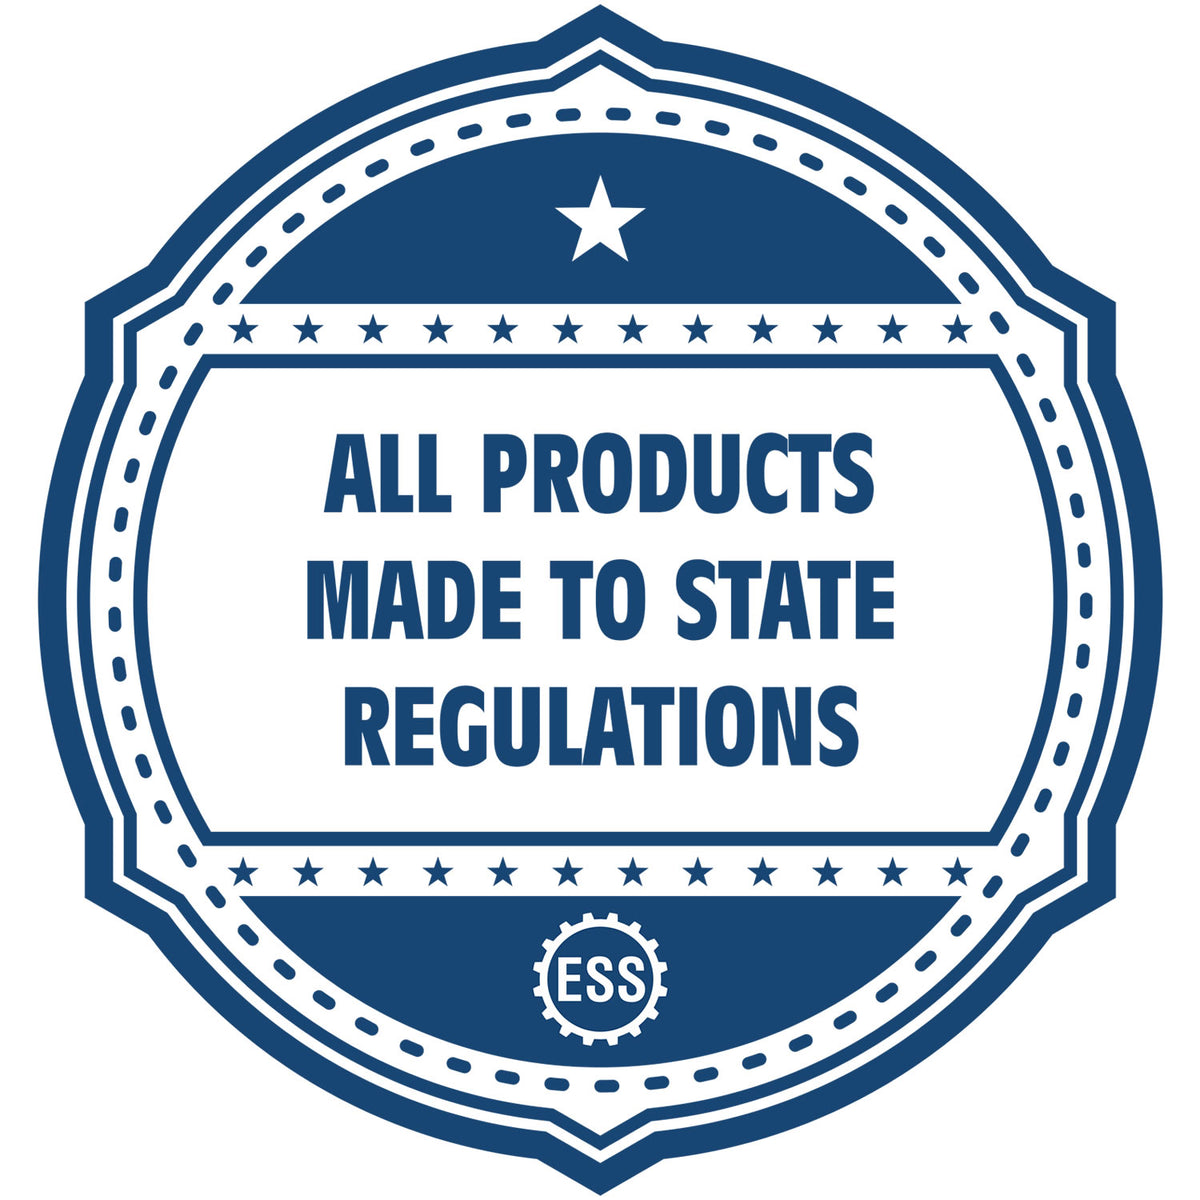 An icon or badge element for the Self-Inking Kentucky Landscape Architect Stamp showing that this product is made in compliance with state regulations.